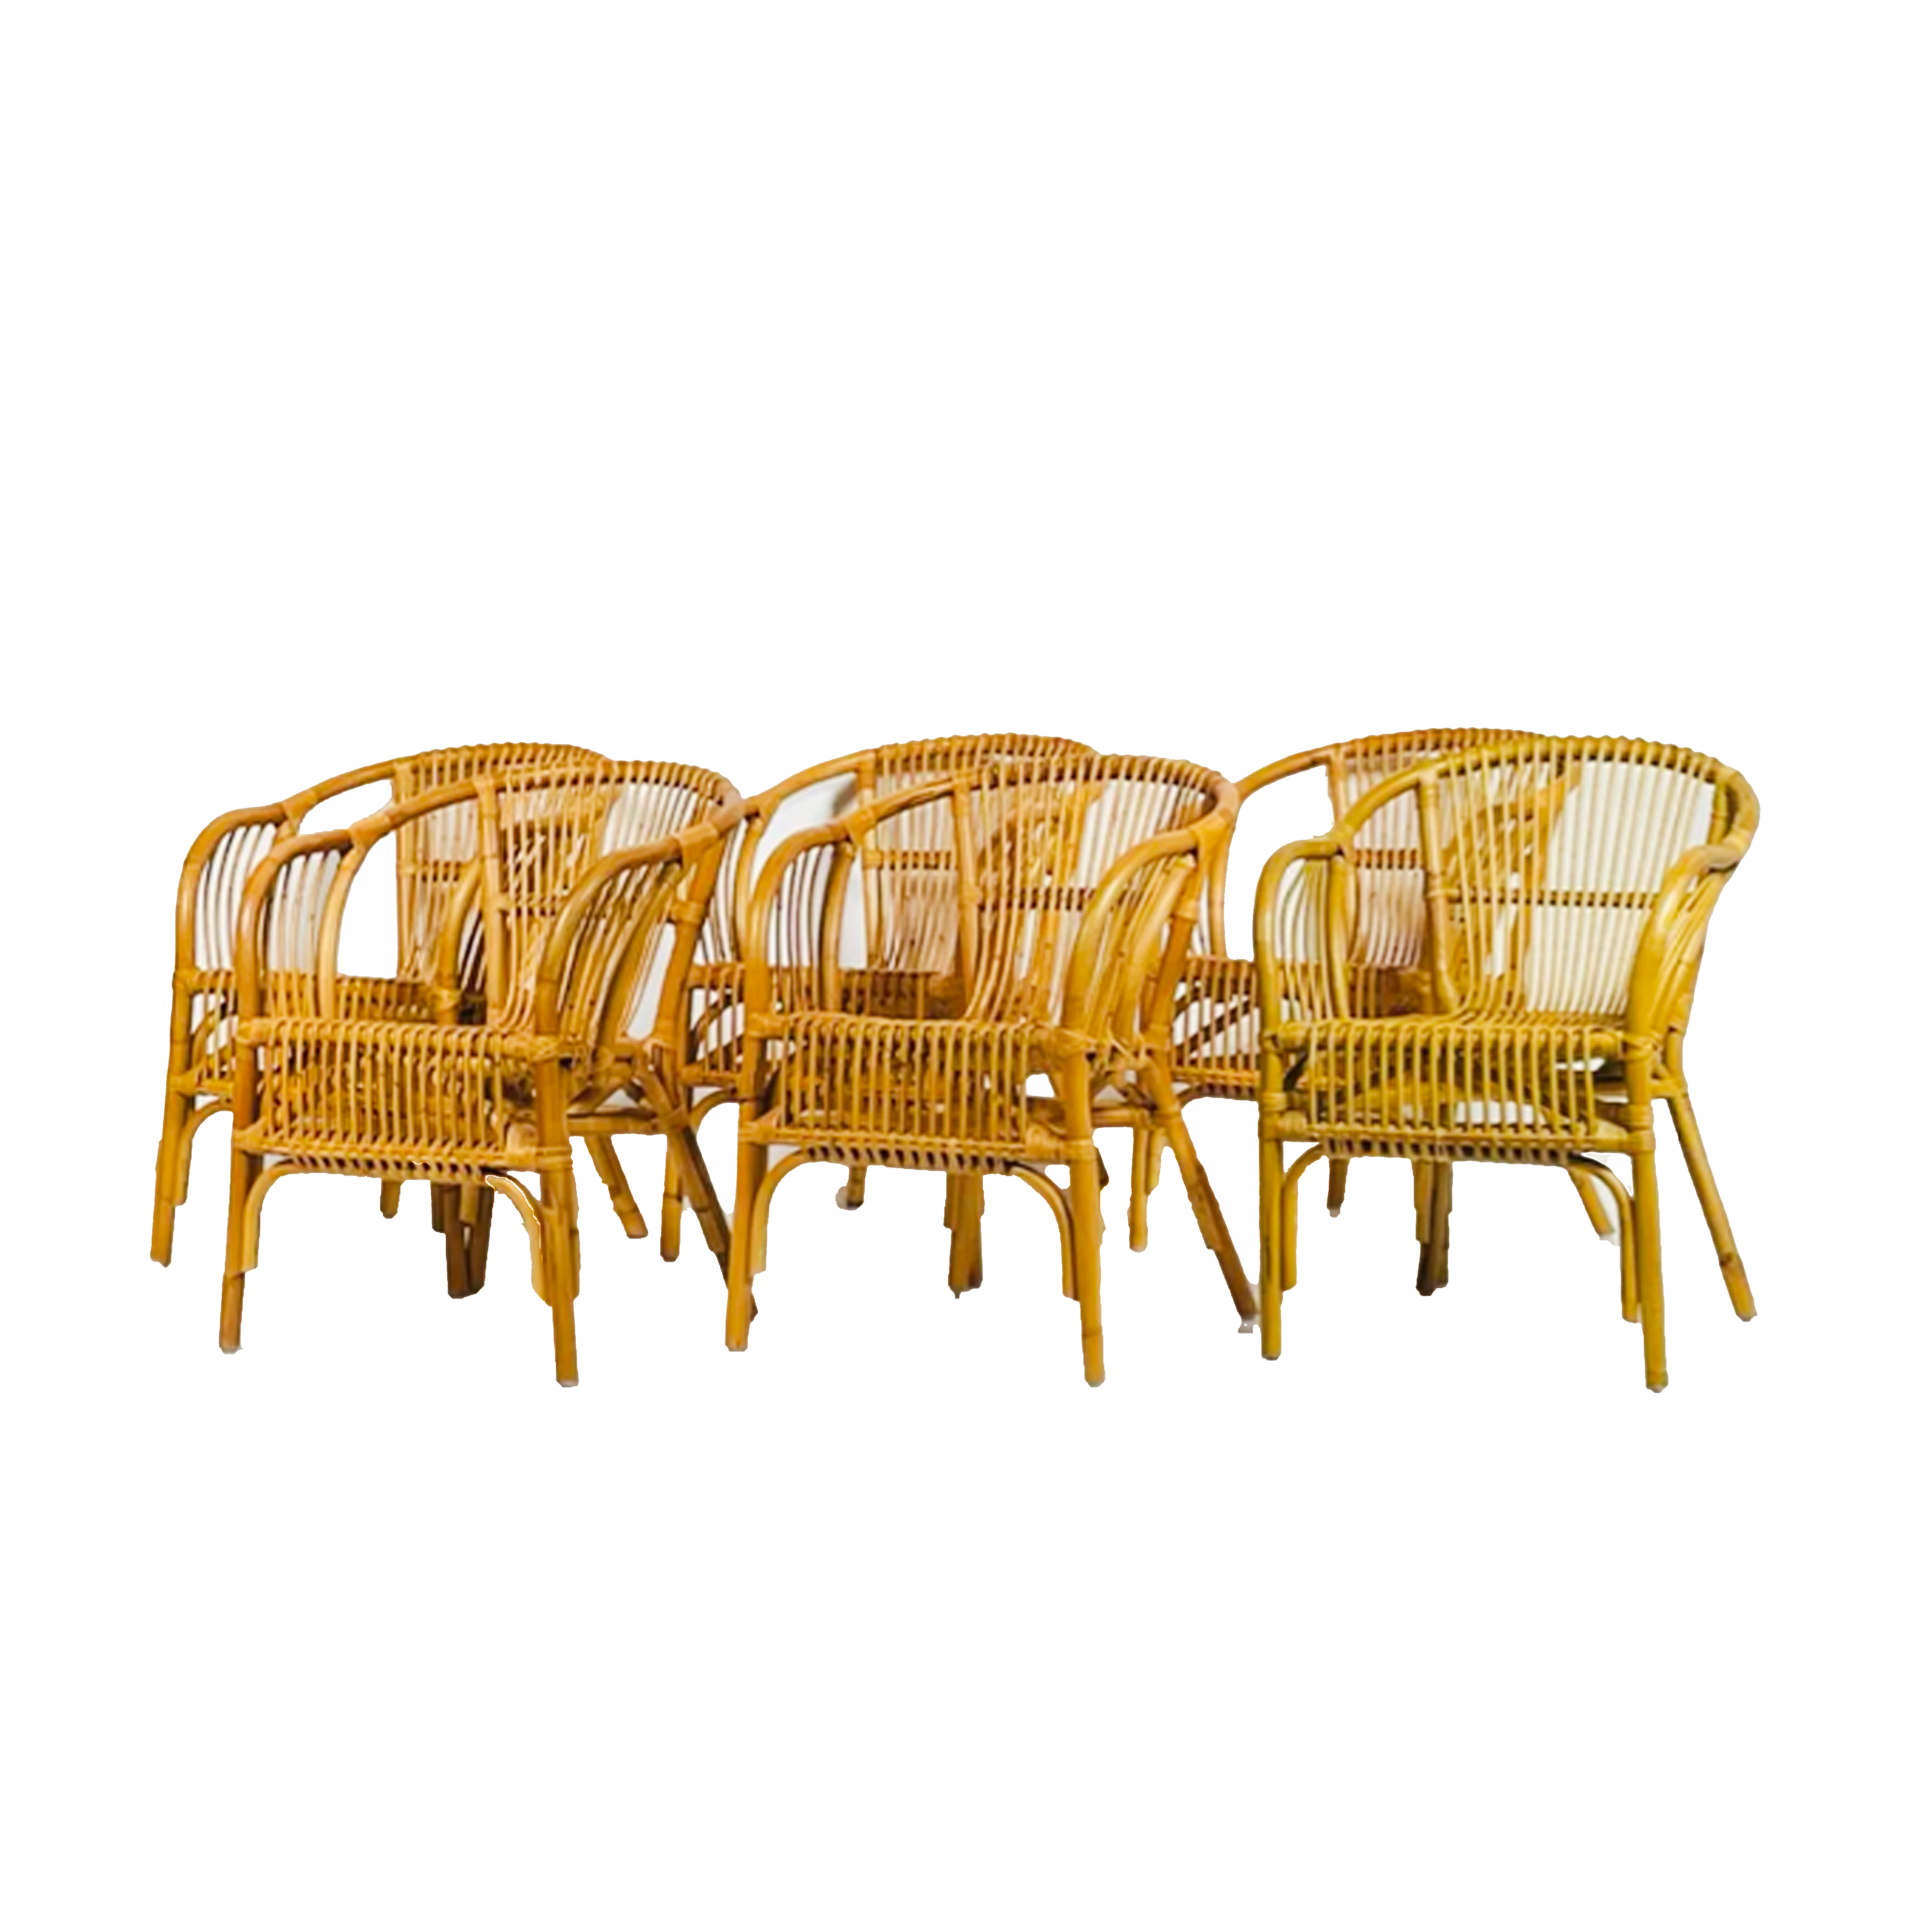 Vintage Rattan Chairs - Set of 6